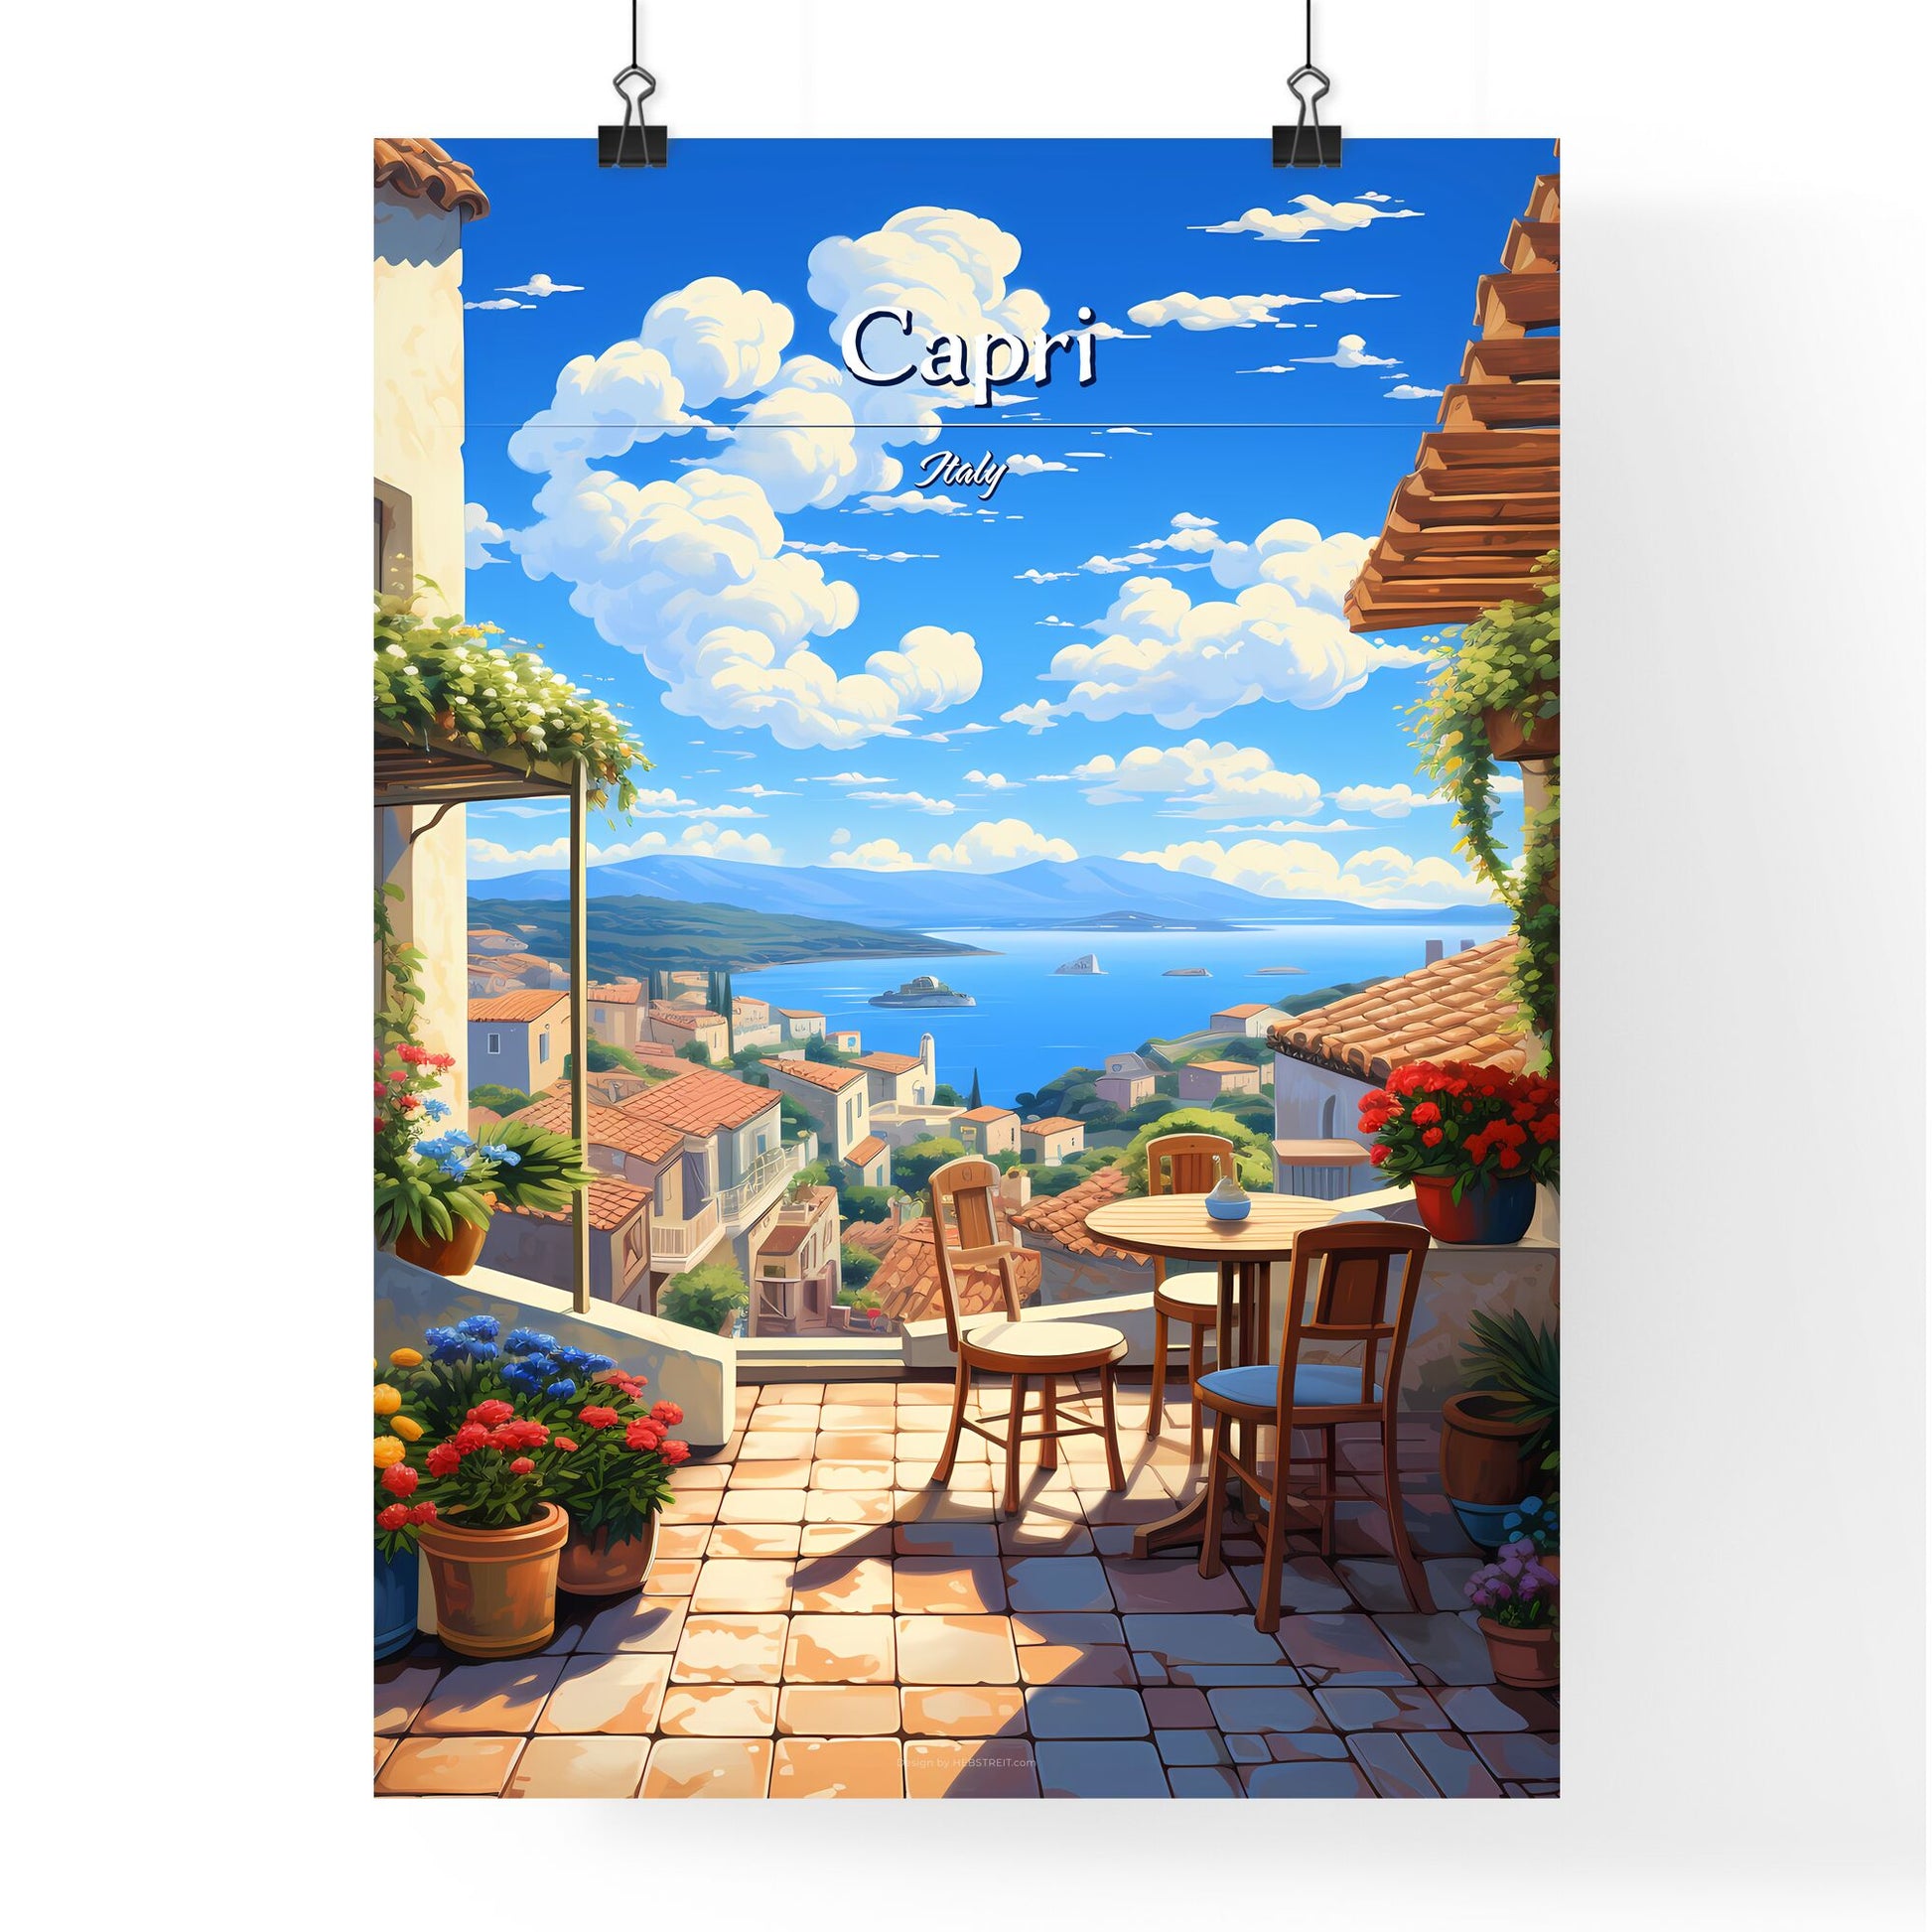 On the roofs of Capri, Italy - Art print of a couple of women in jeans Default Title